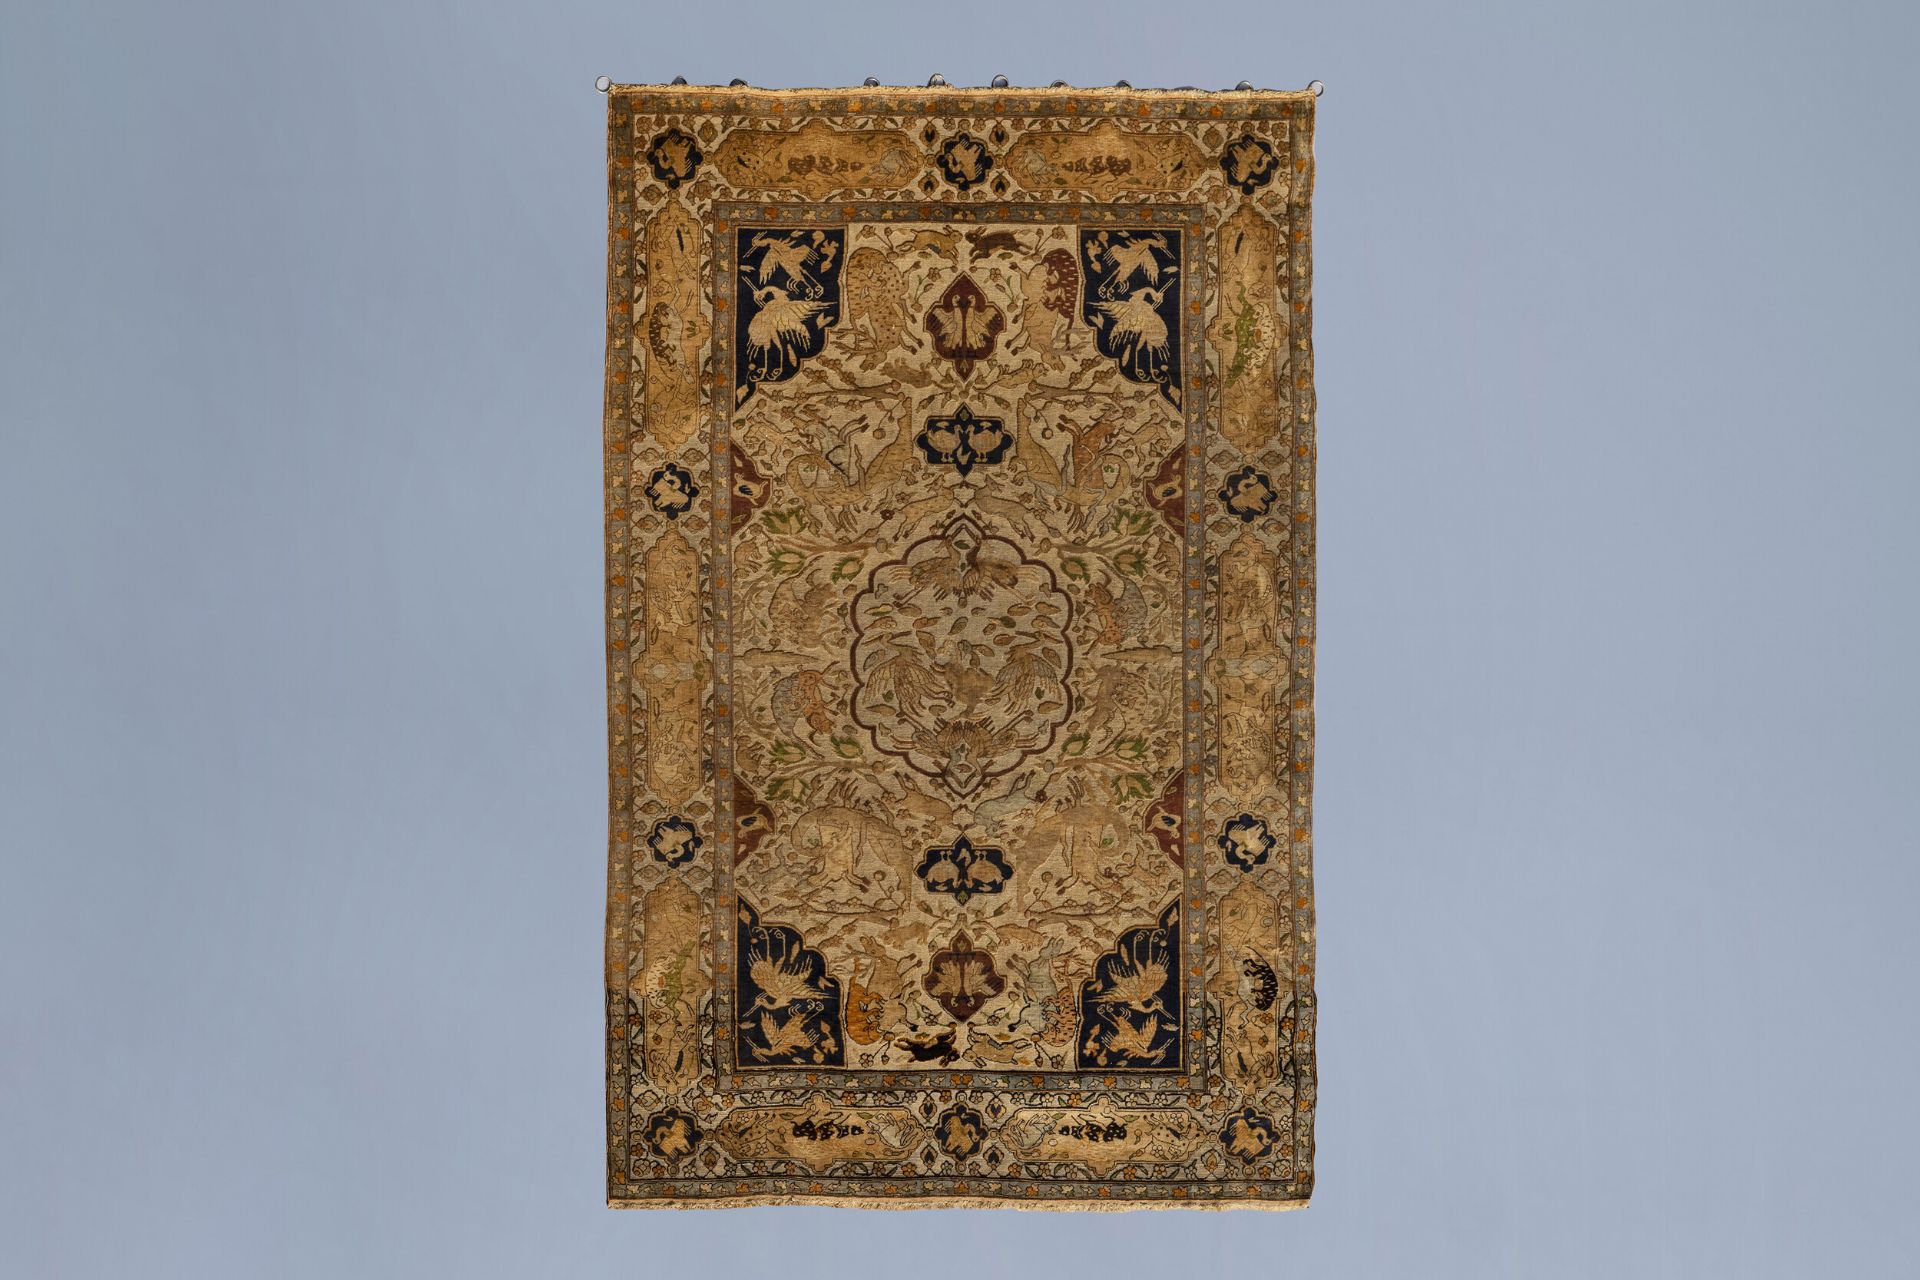 A lavish Oriental rug with animals and floral design, silk and gold thread on cotton, 19th C.